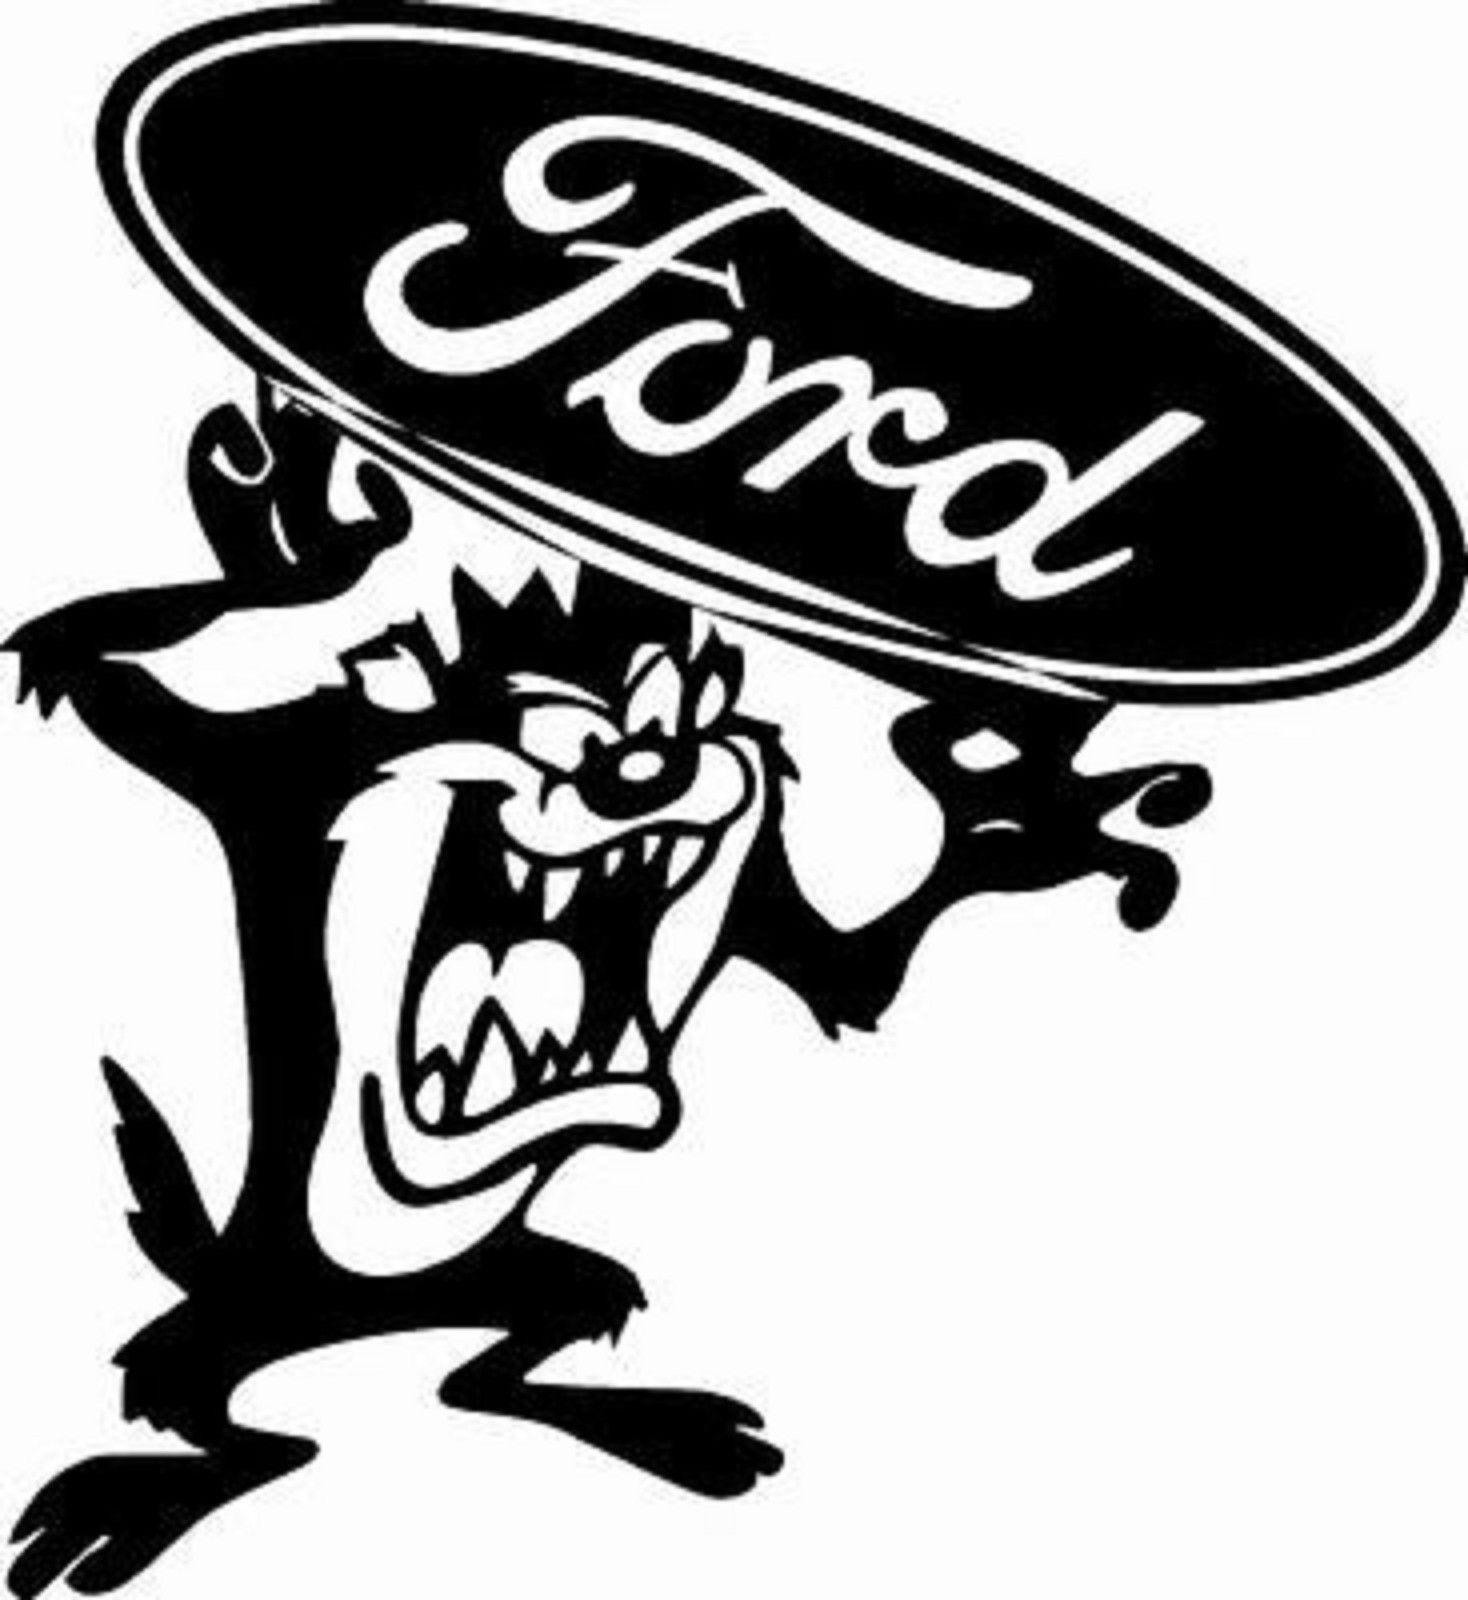 Scary Ford Logo - $3.99 - Ford Taz Funny Monster Car Scary Brand Muscle Design Vinyl ...